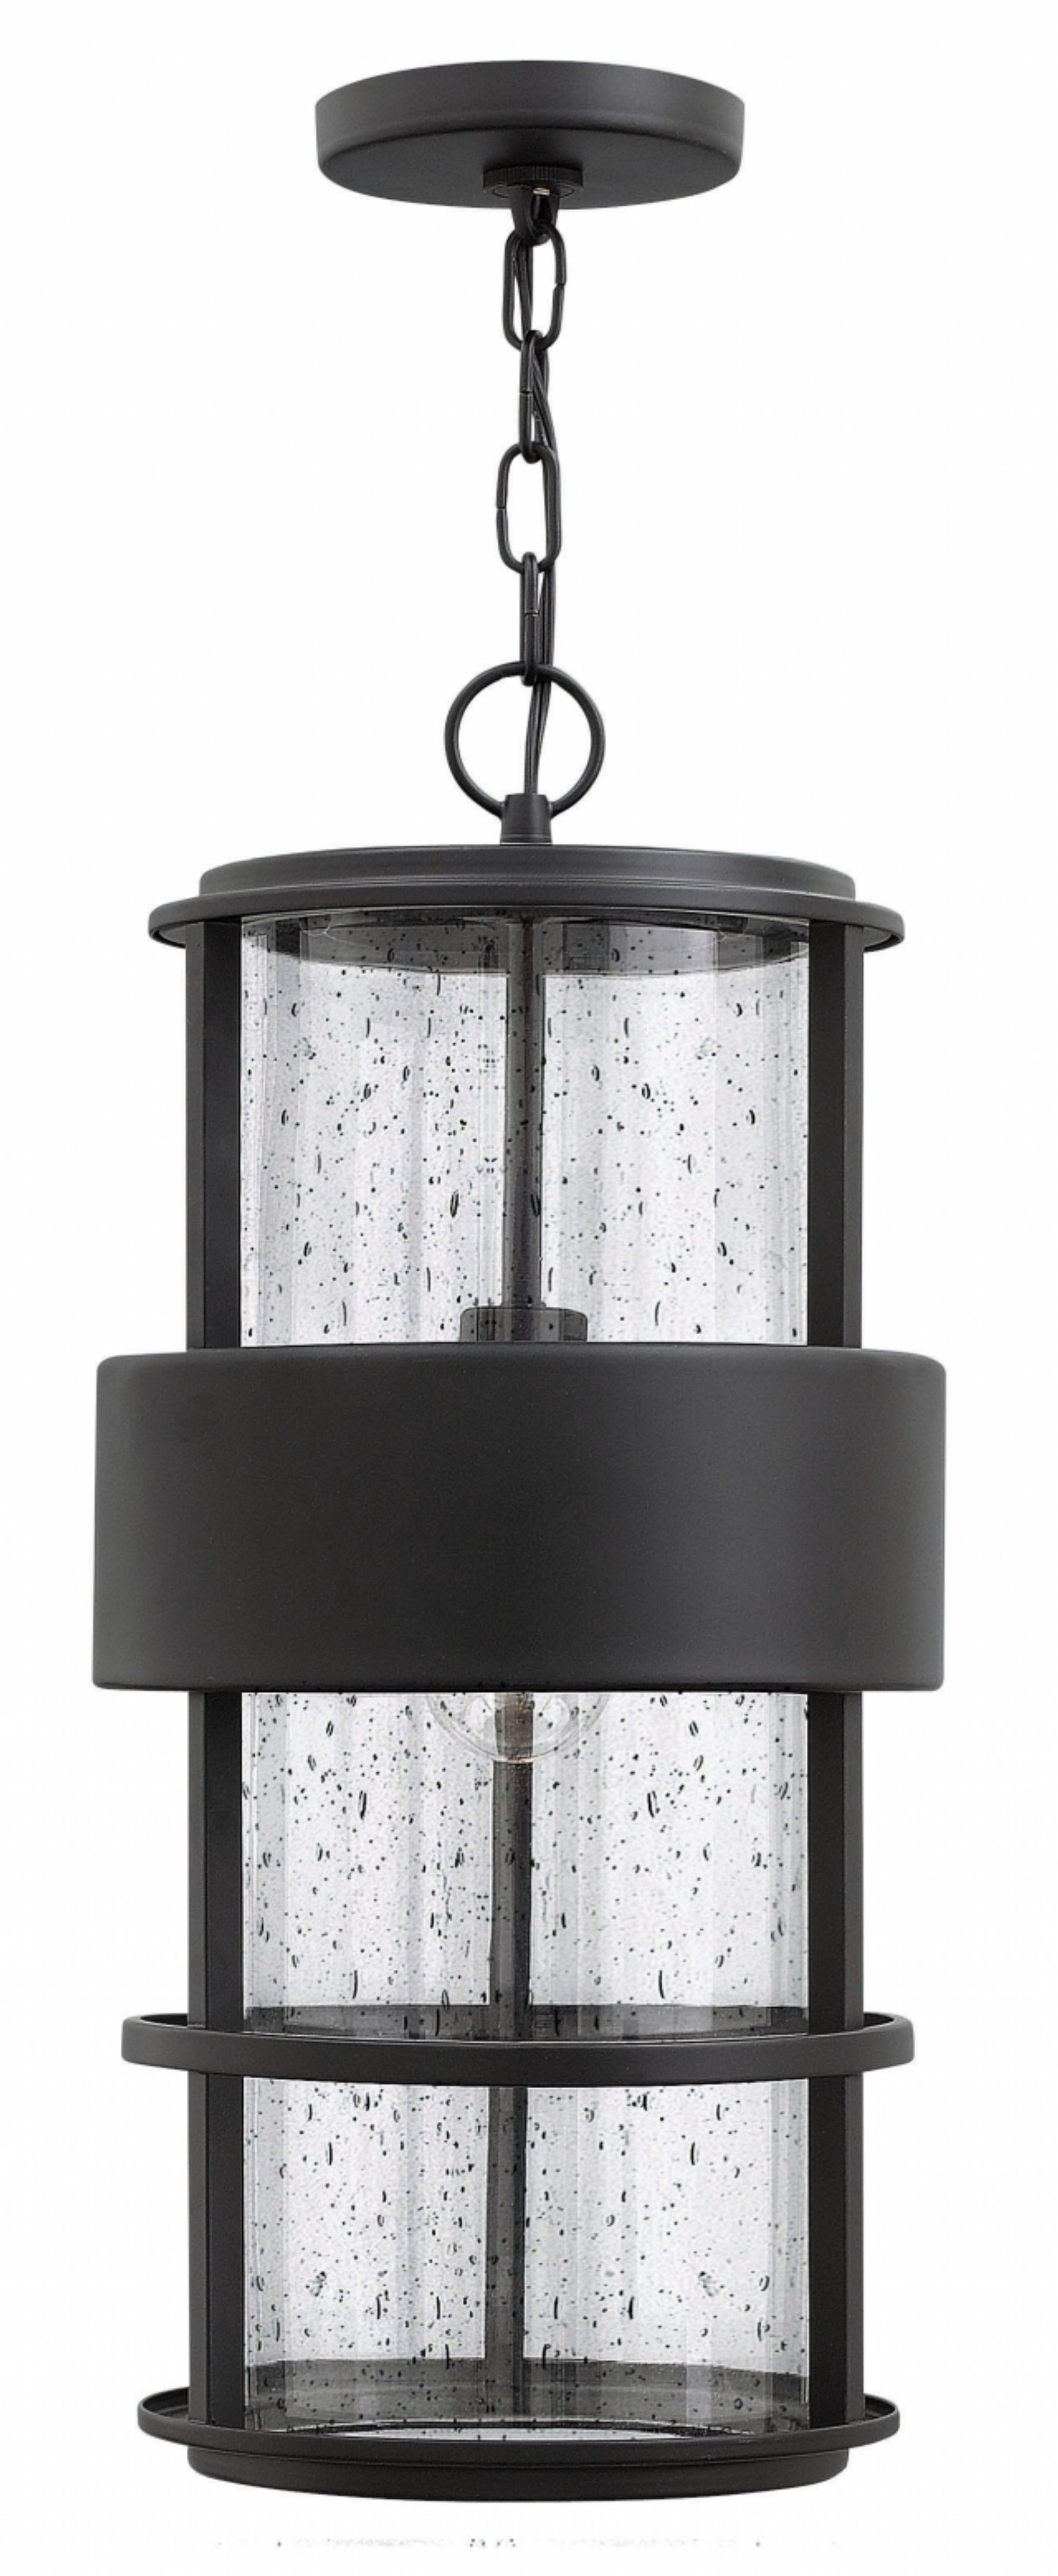 Famous Satin Black Saturn > Exterior Ceiling Mount Within Contemporary Hanging Porch Hinkley Lighting (View 6 of 20)